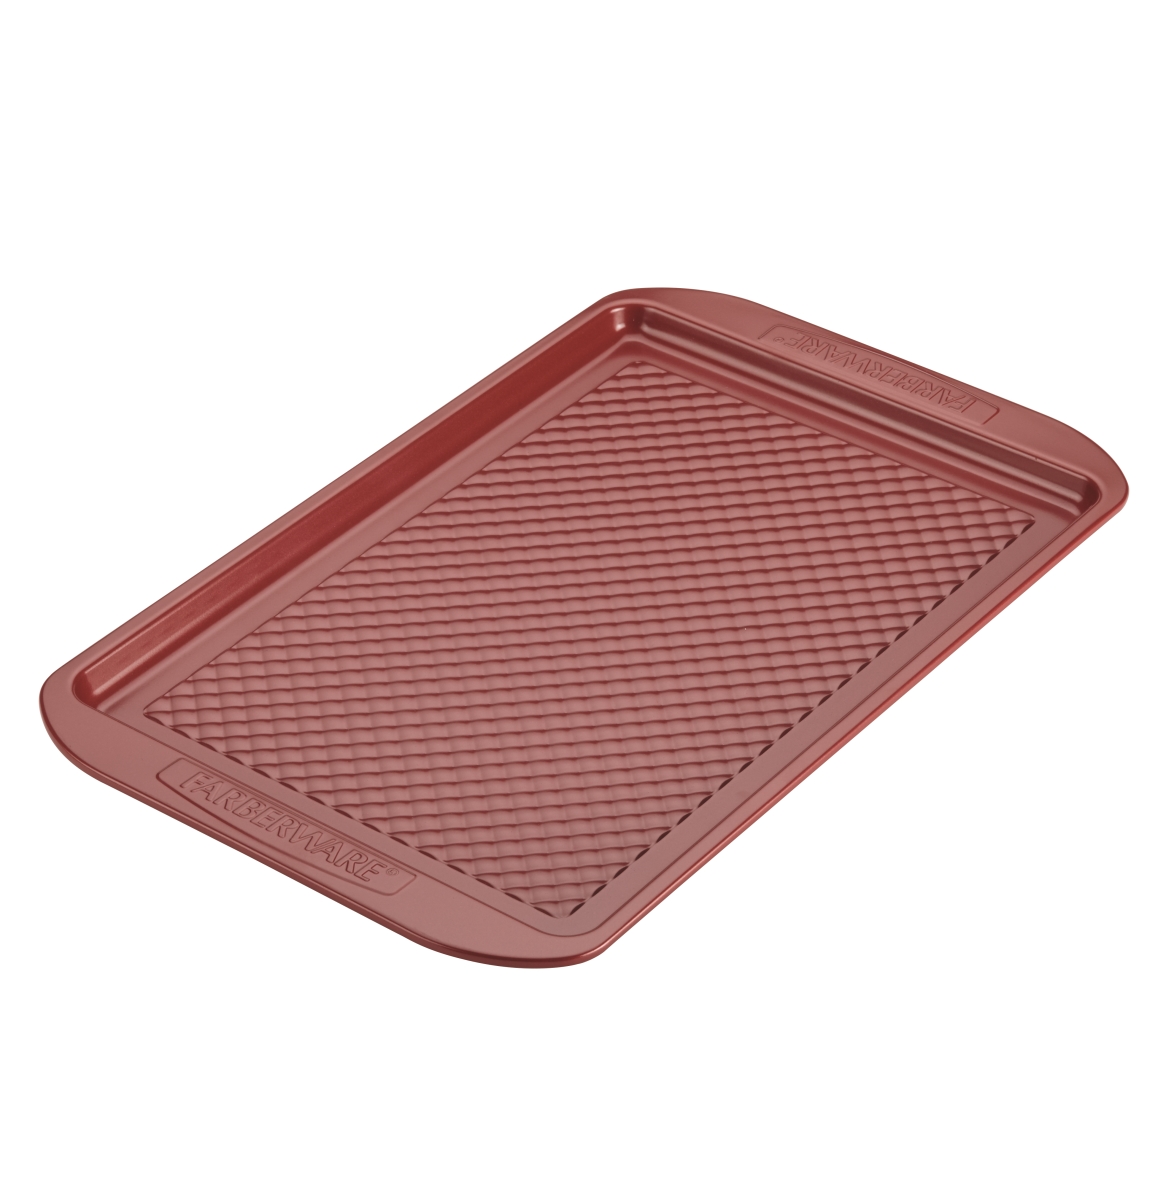 47137 Colorvive Nonstick Cookie Pan, Red - 11 X 17 In.